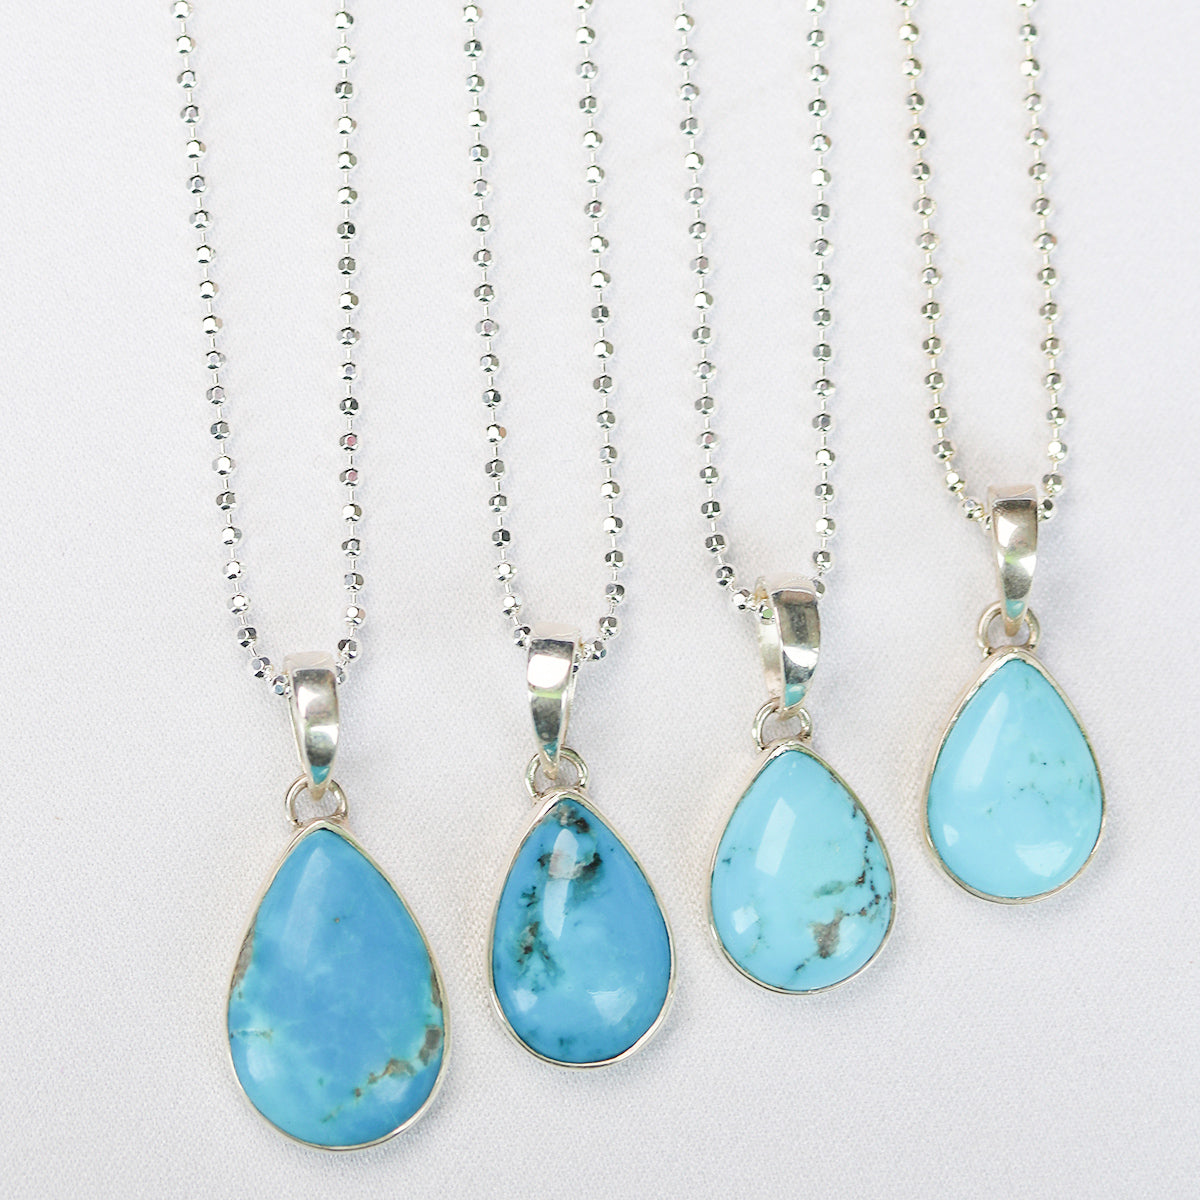 Genuine Turquoise Necklace, Upside Down Tear Drop, Turquoise Pendant  Necklace, Dainty Necklace